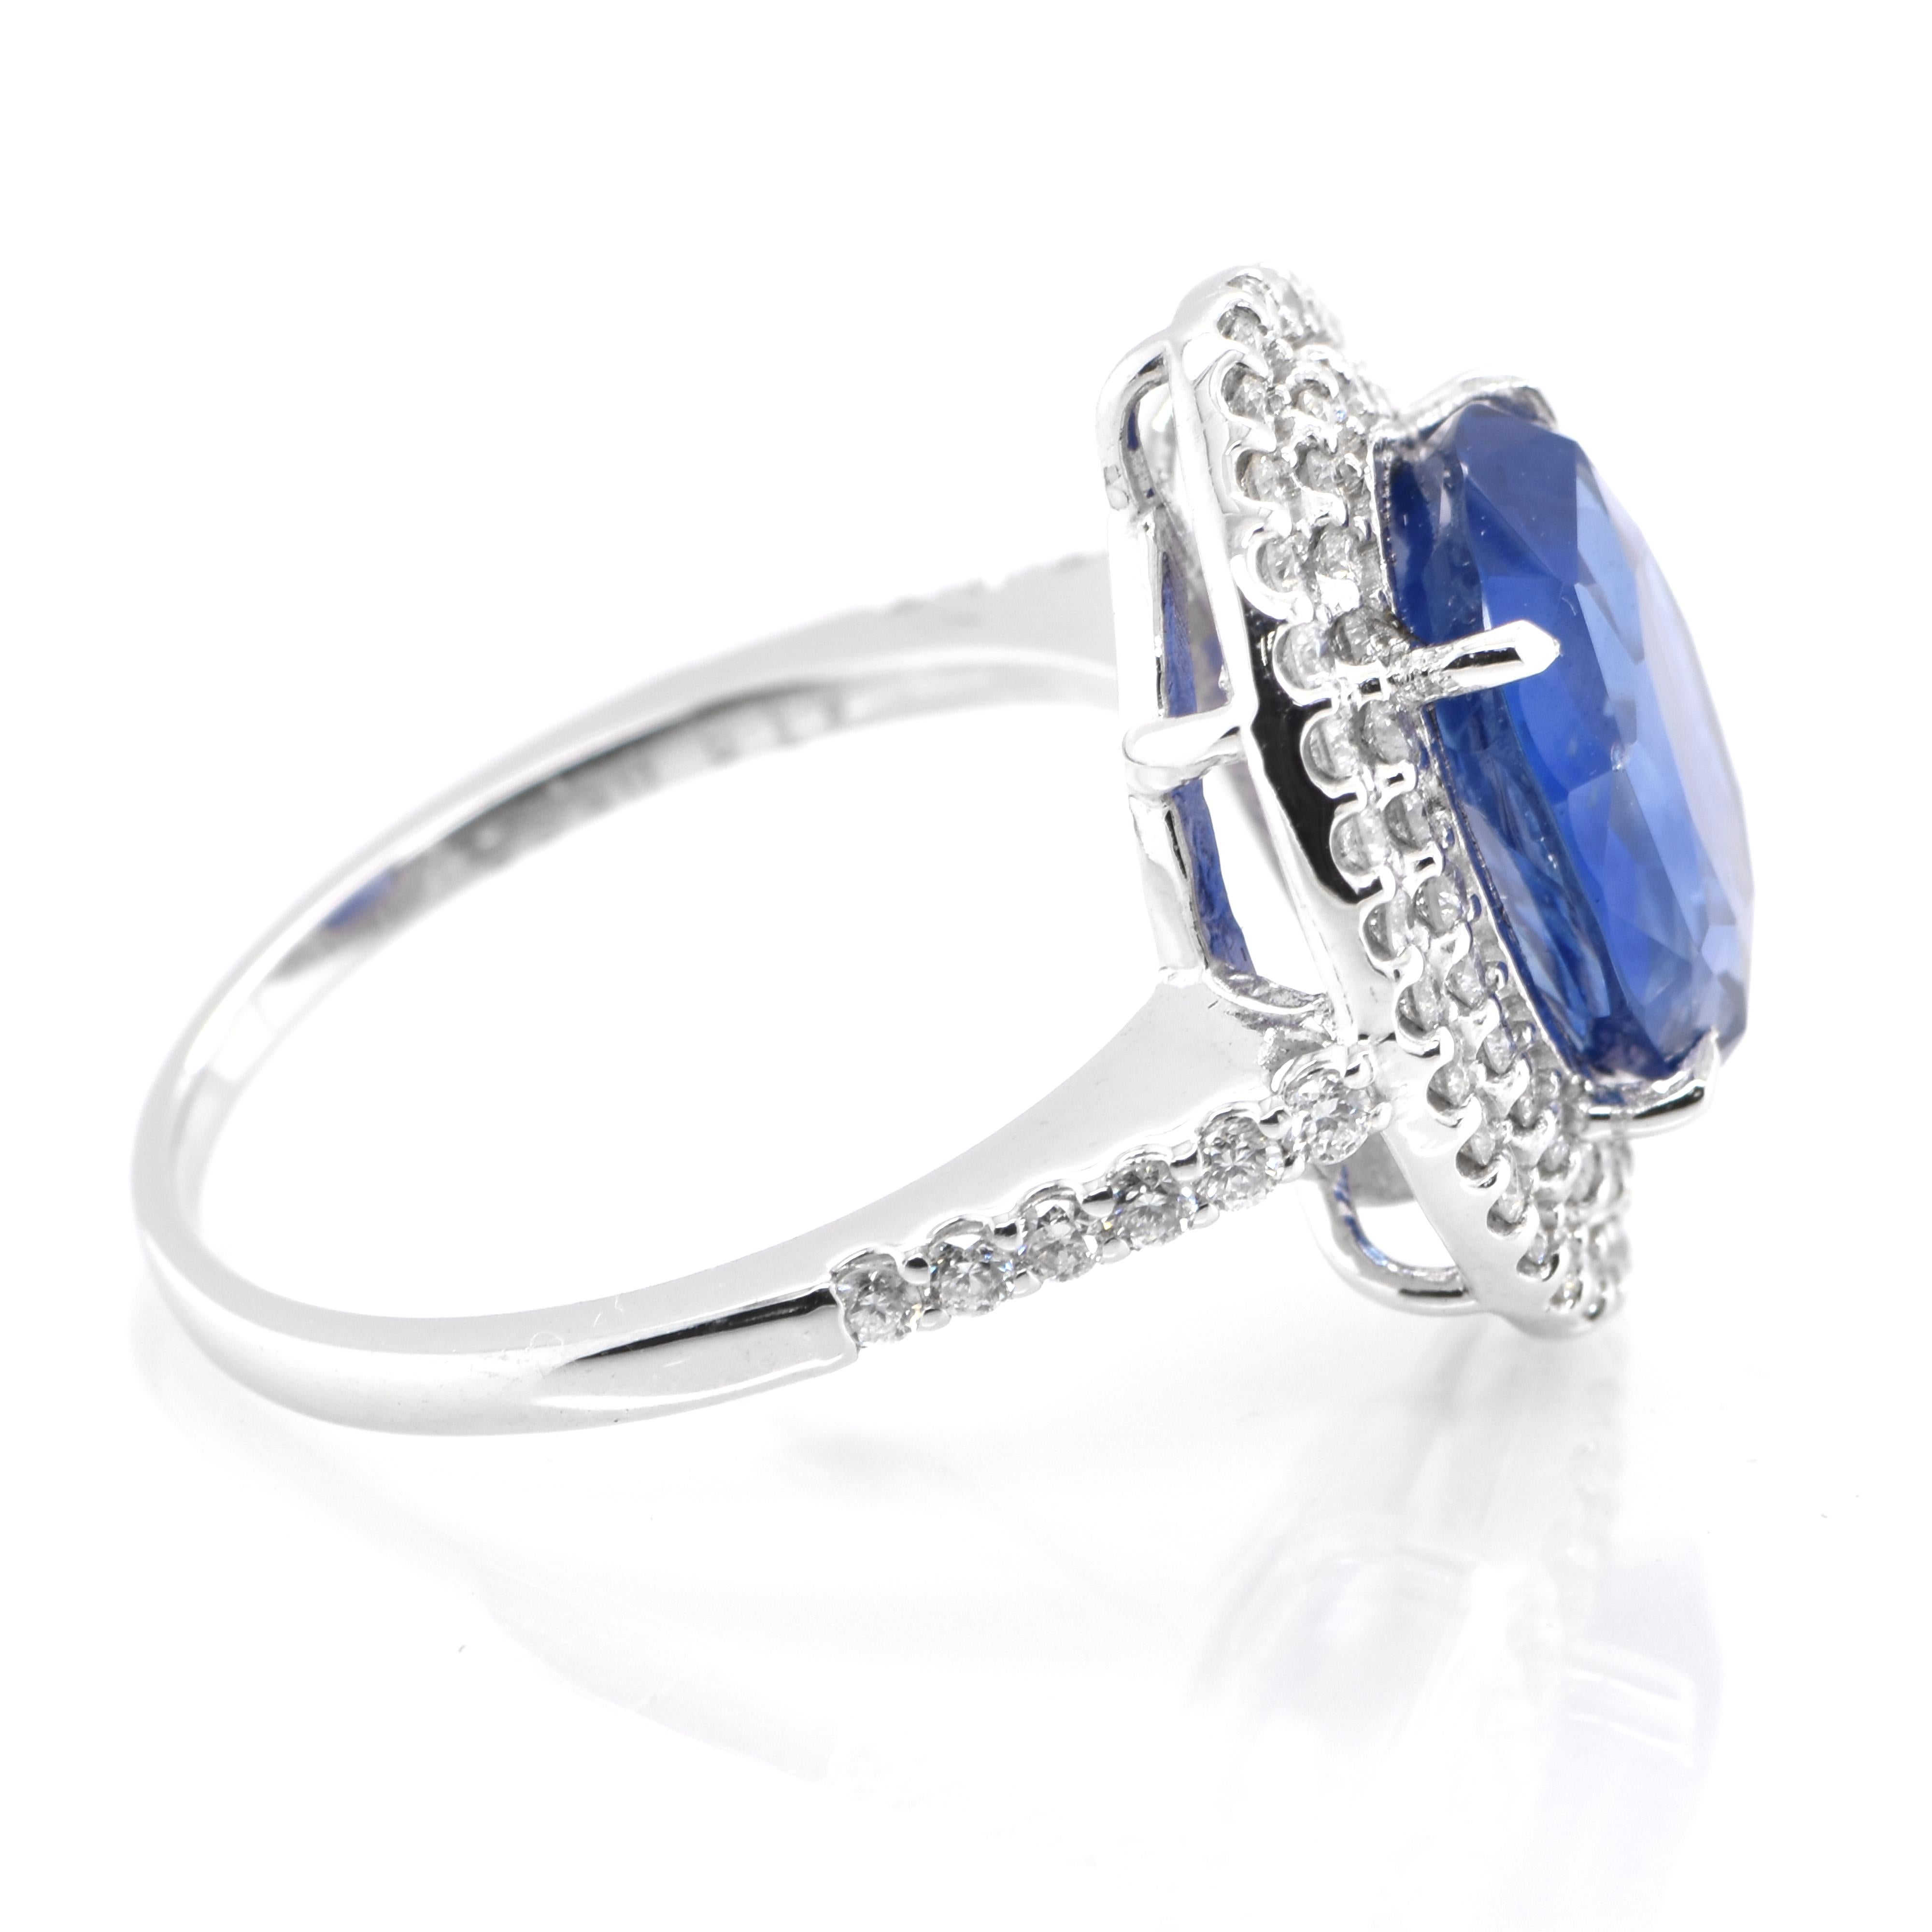 Oval Cut GIA Certified 4.73 Carat Natural, Unheated Ceylon Sapphire Ring Set in Platinum